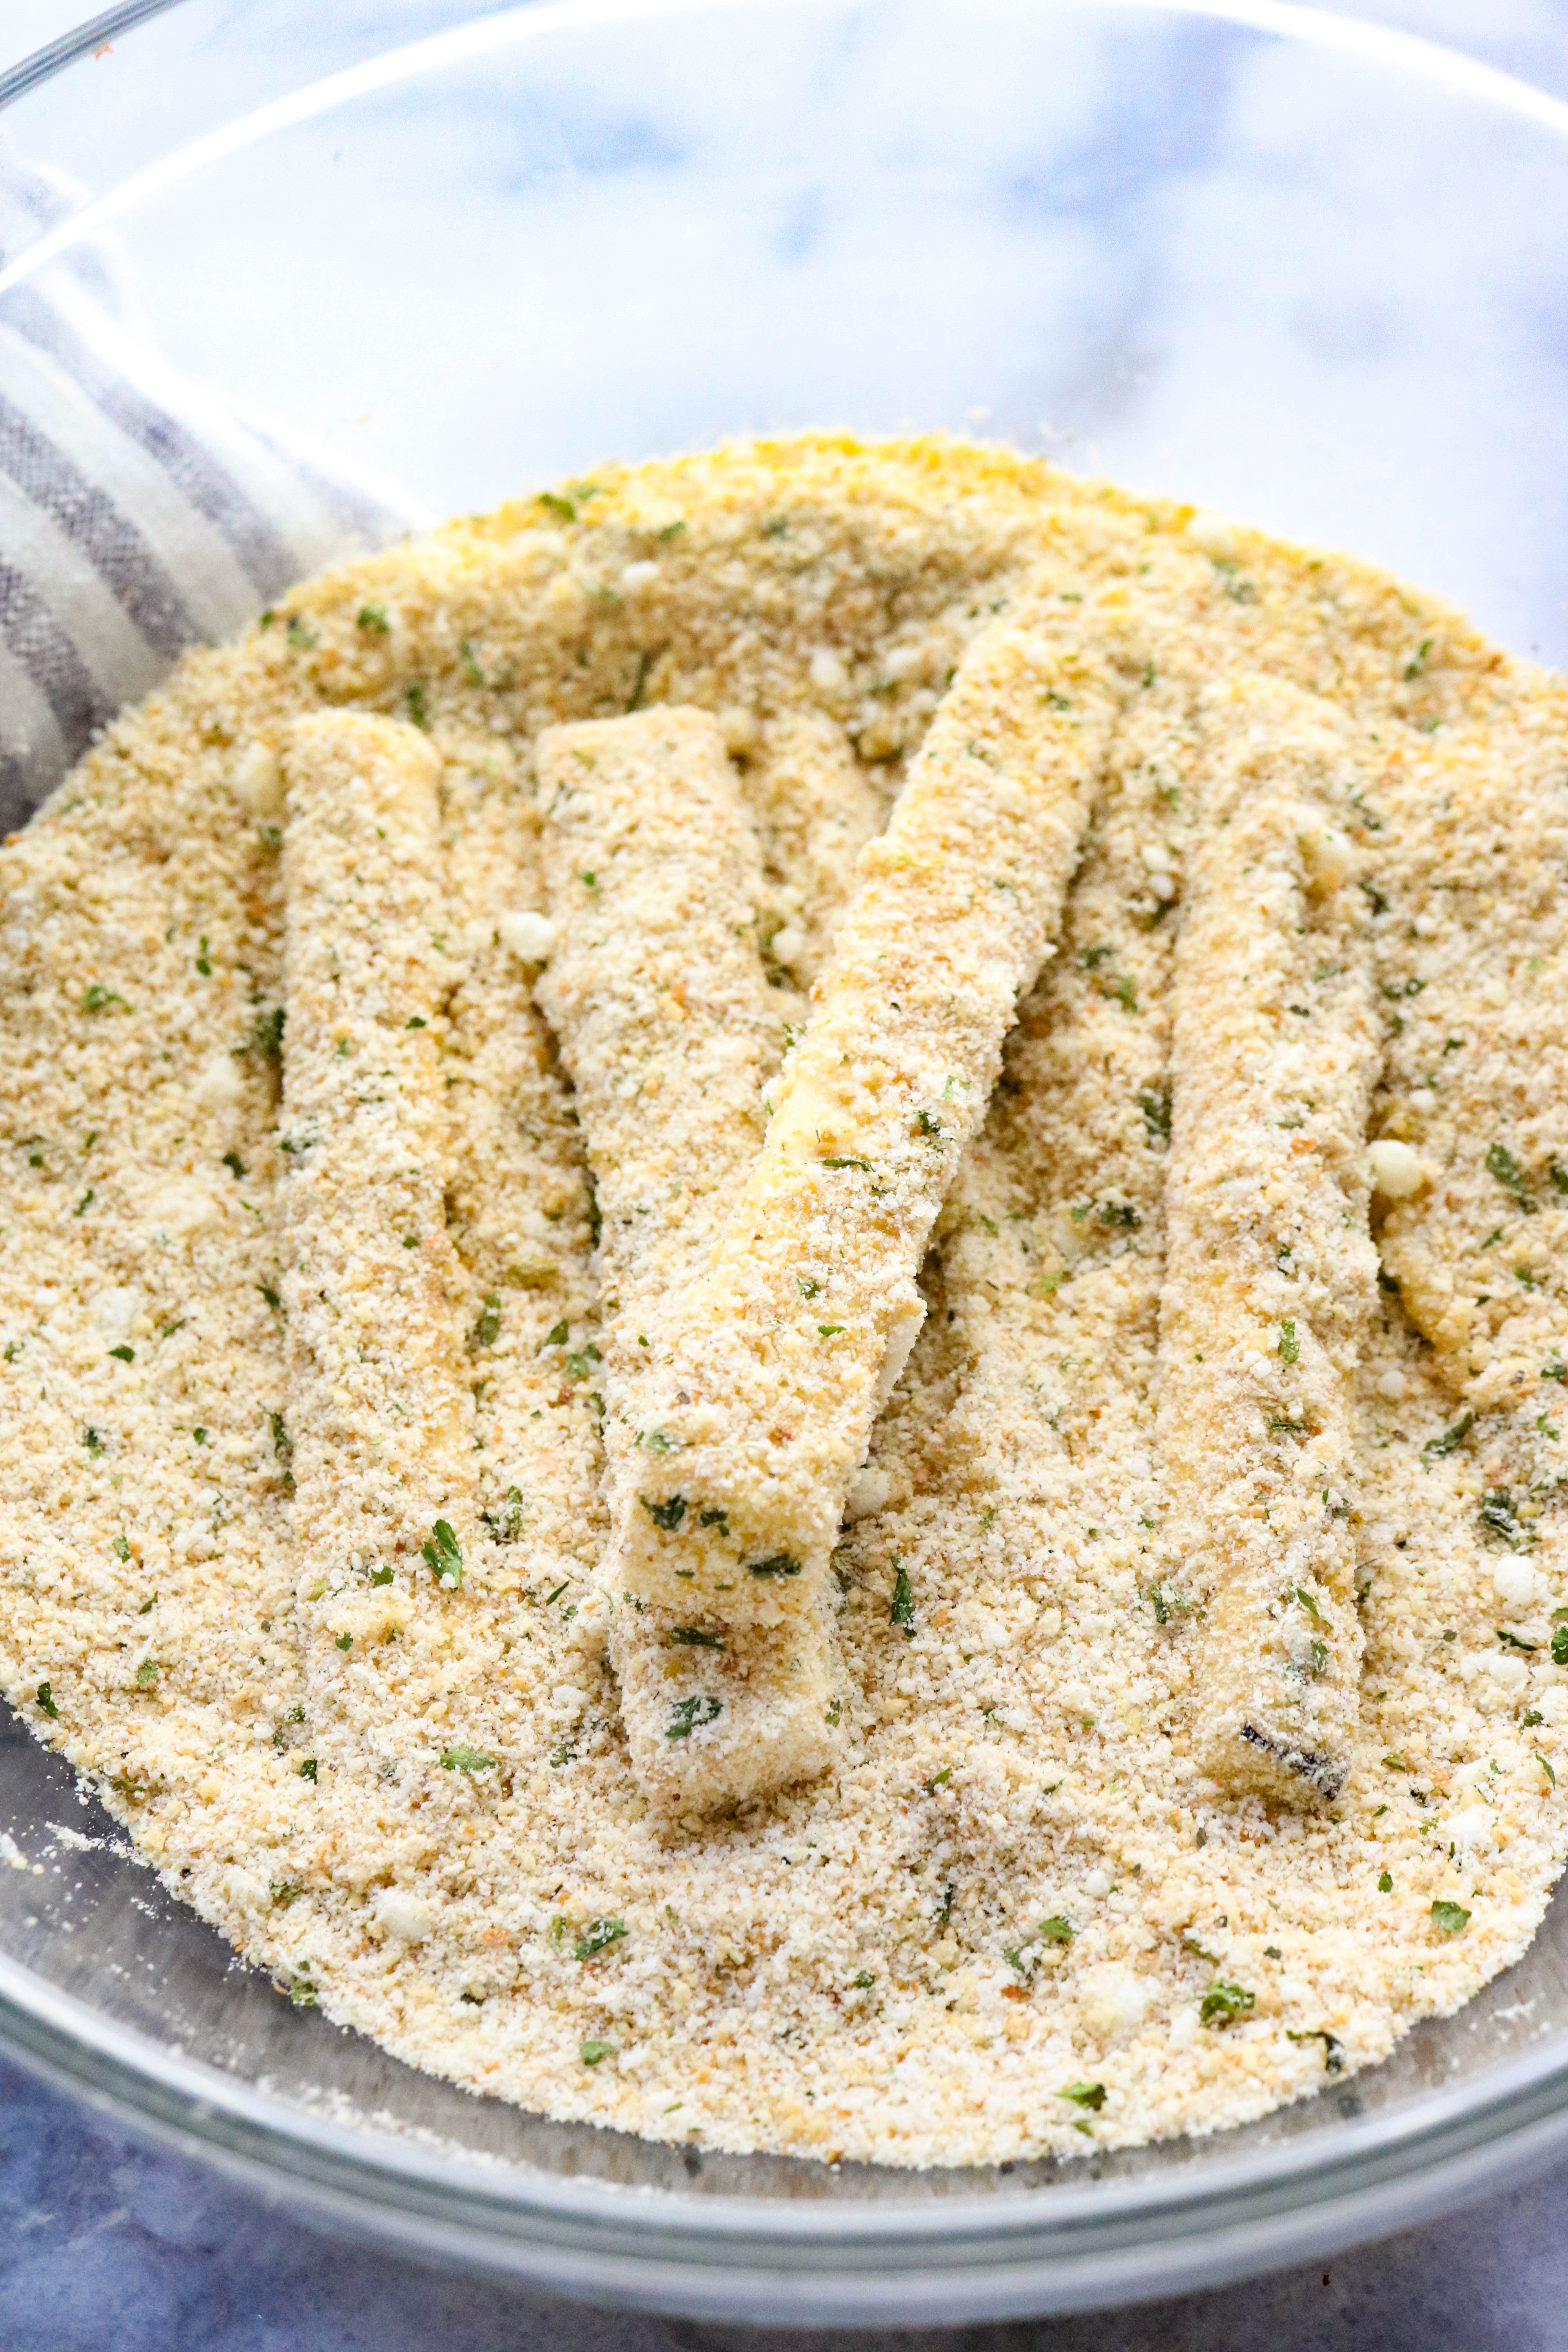 Eggplant sticks breaded laying in a bowl of seasoned breadcrumbs